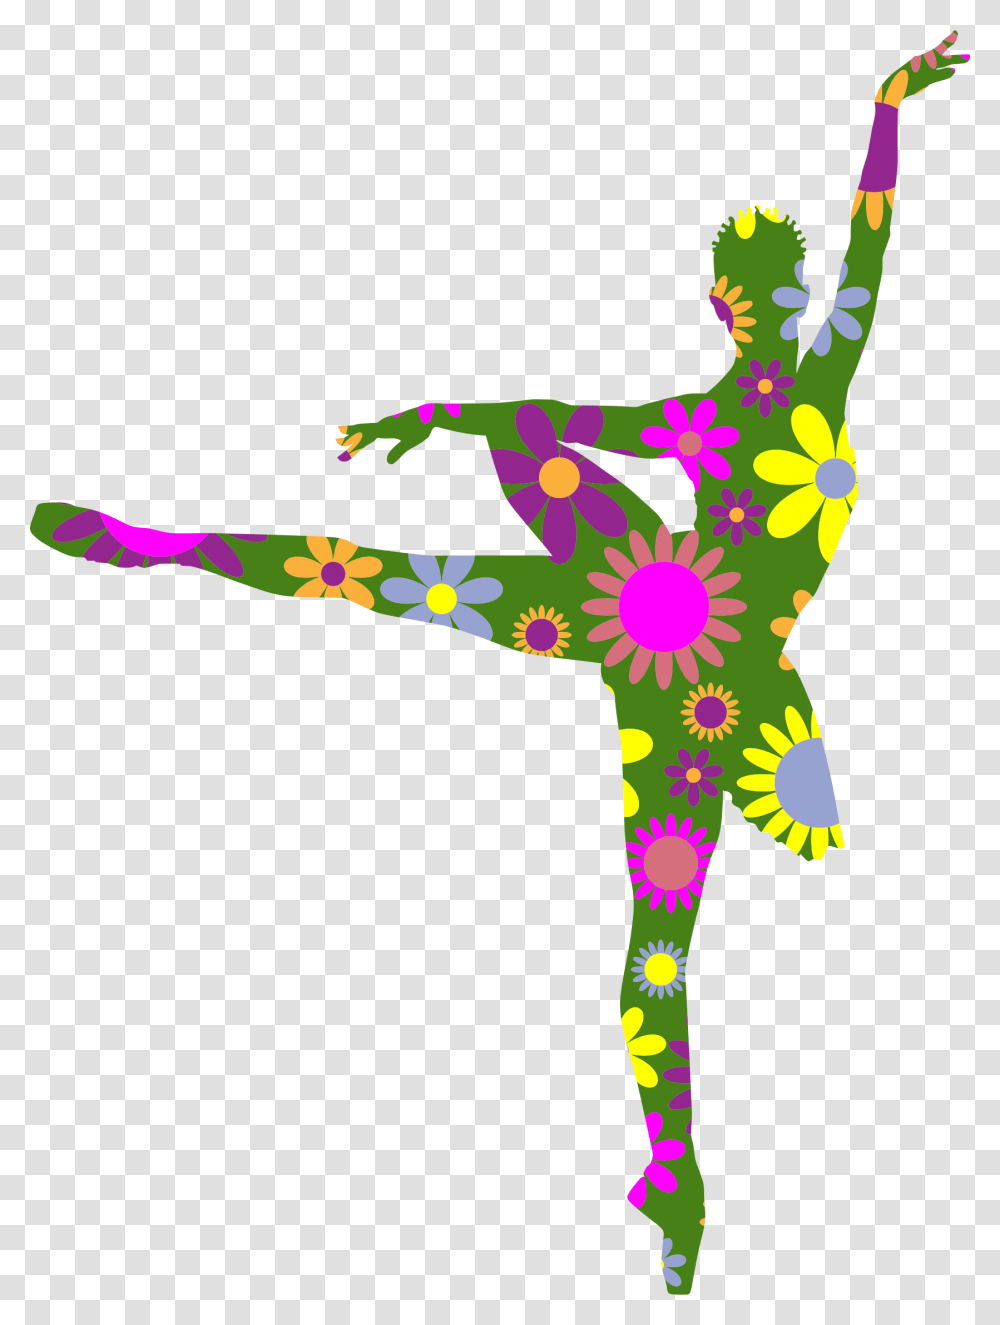 Retro Floral Braided Hair Ballerina Clip Arts Floral Ballerina, Star Symbol, Leisure Activities, Toy, Juggling Transparent Png